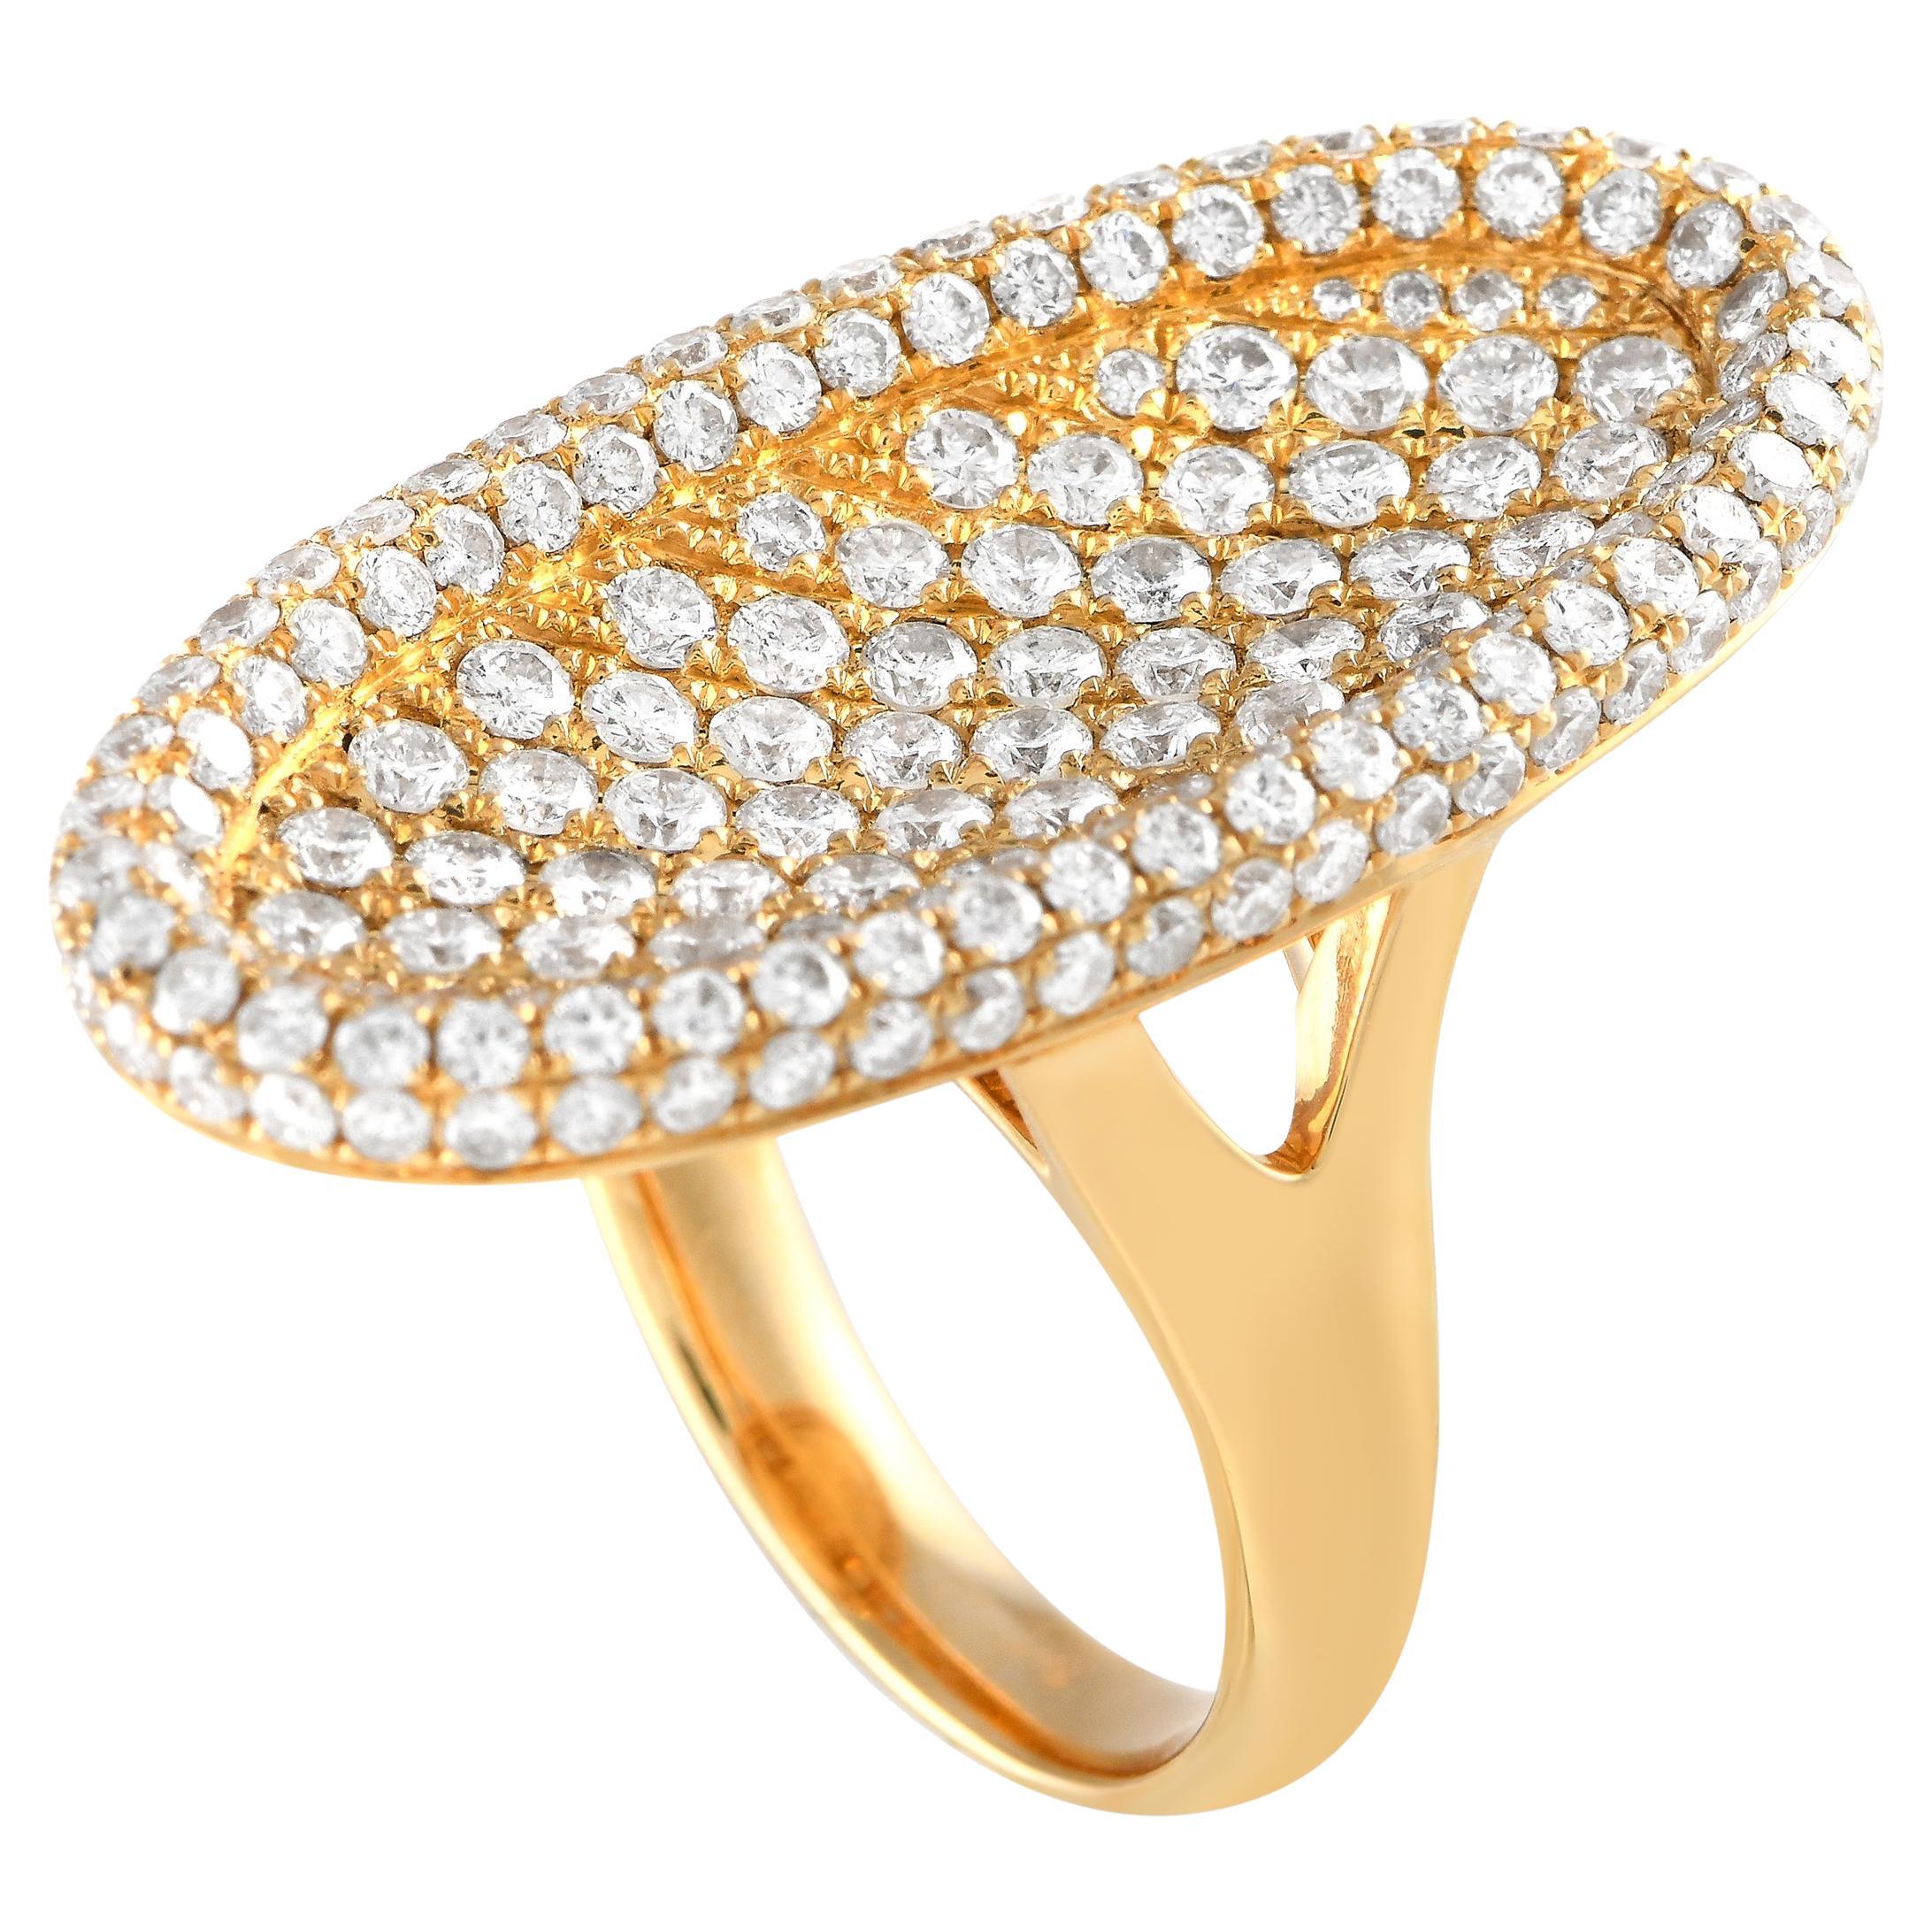 LB Exclusive 18K Yellow Gold 3.0ct Diamond Oval Ring For Sale